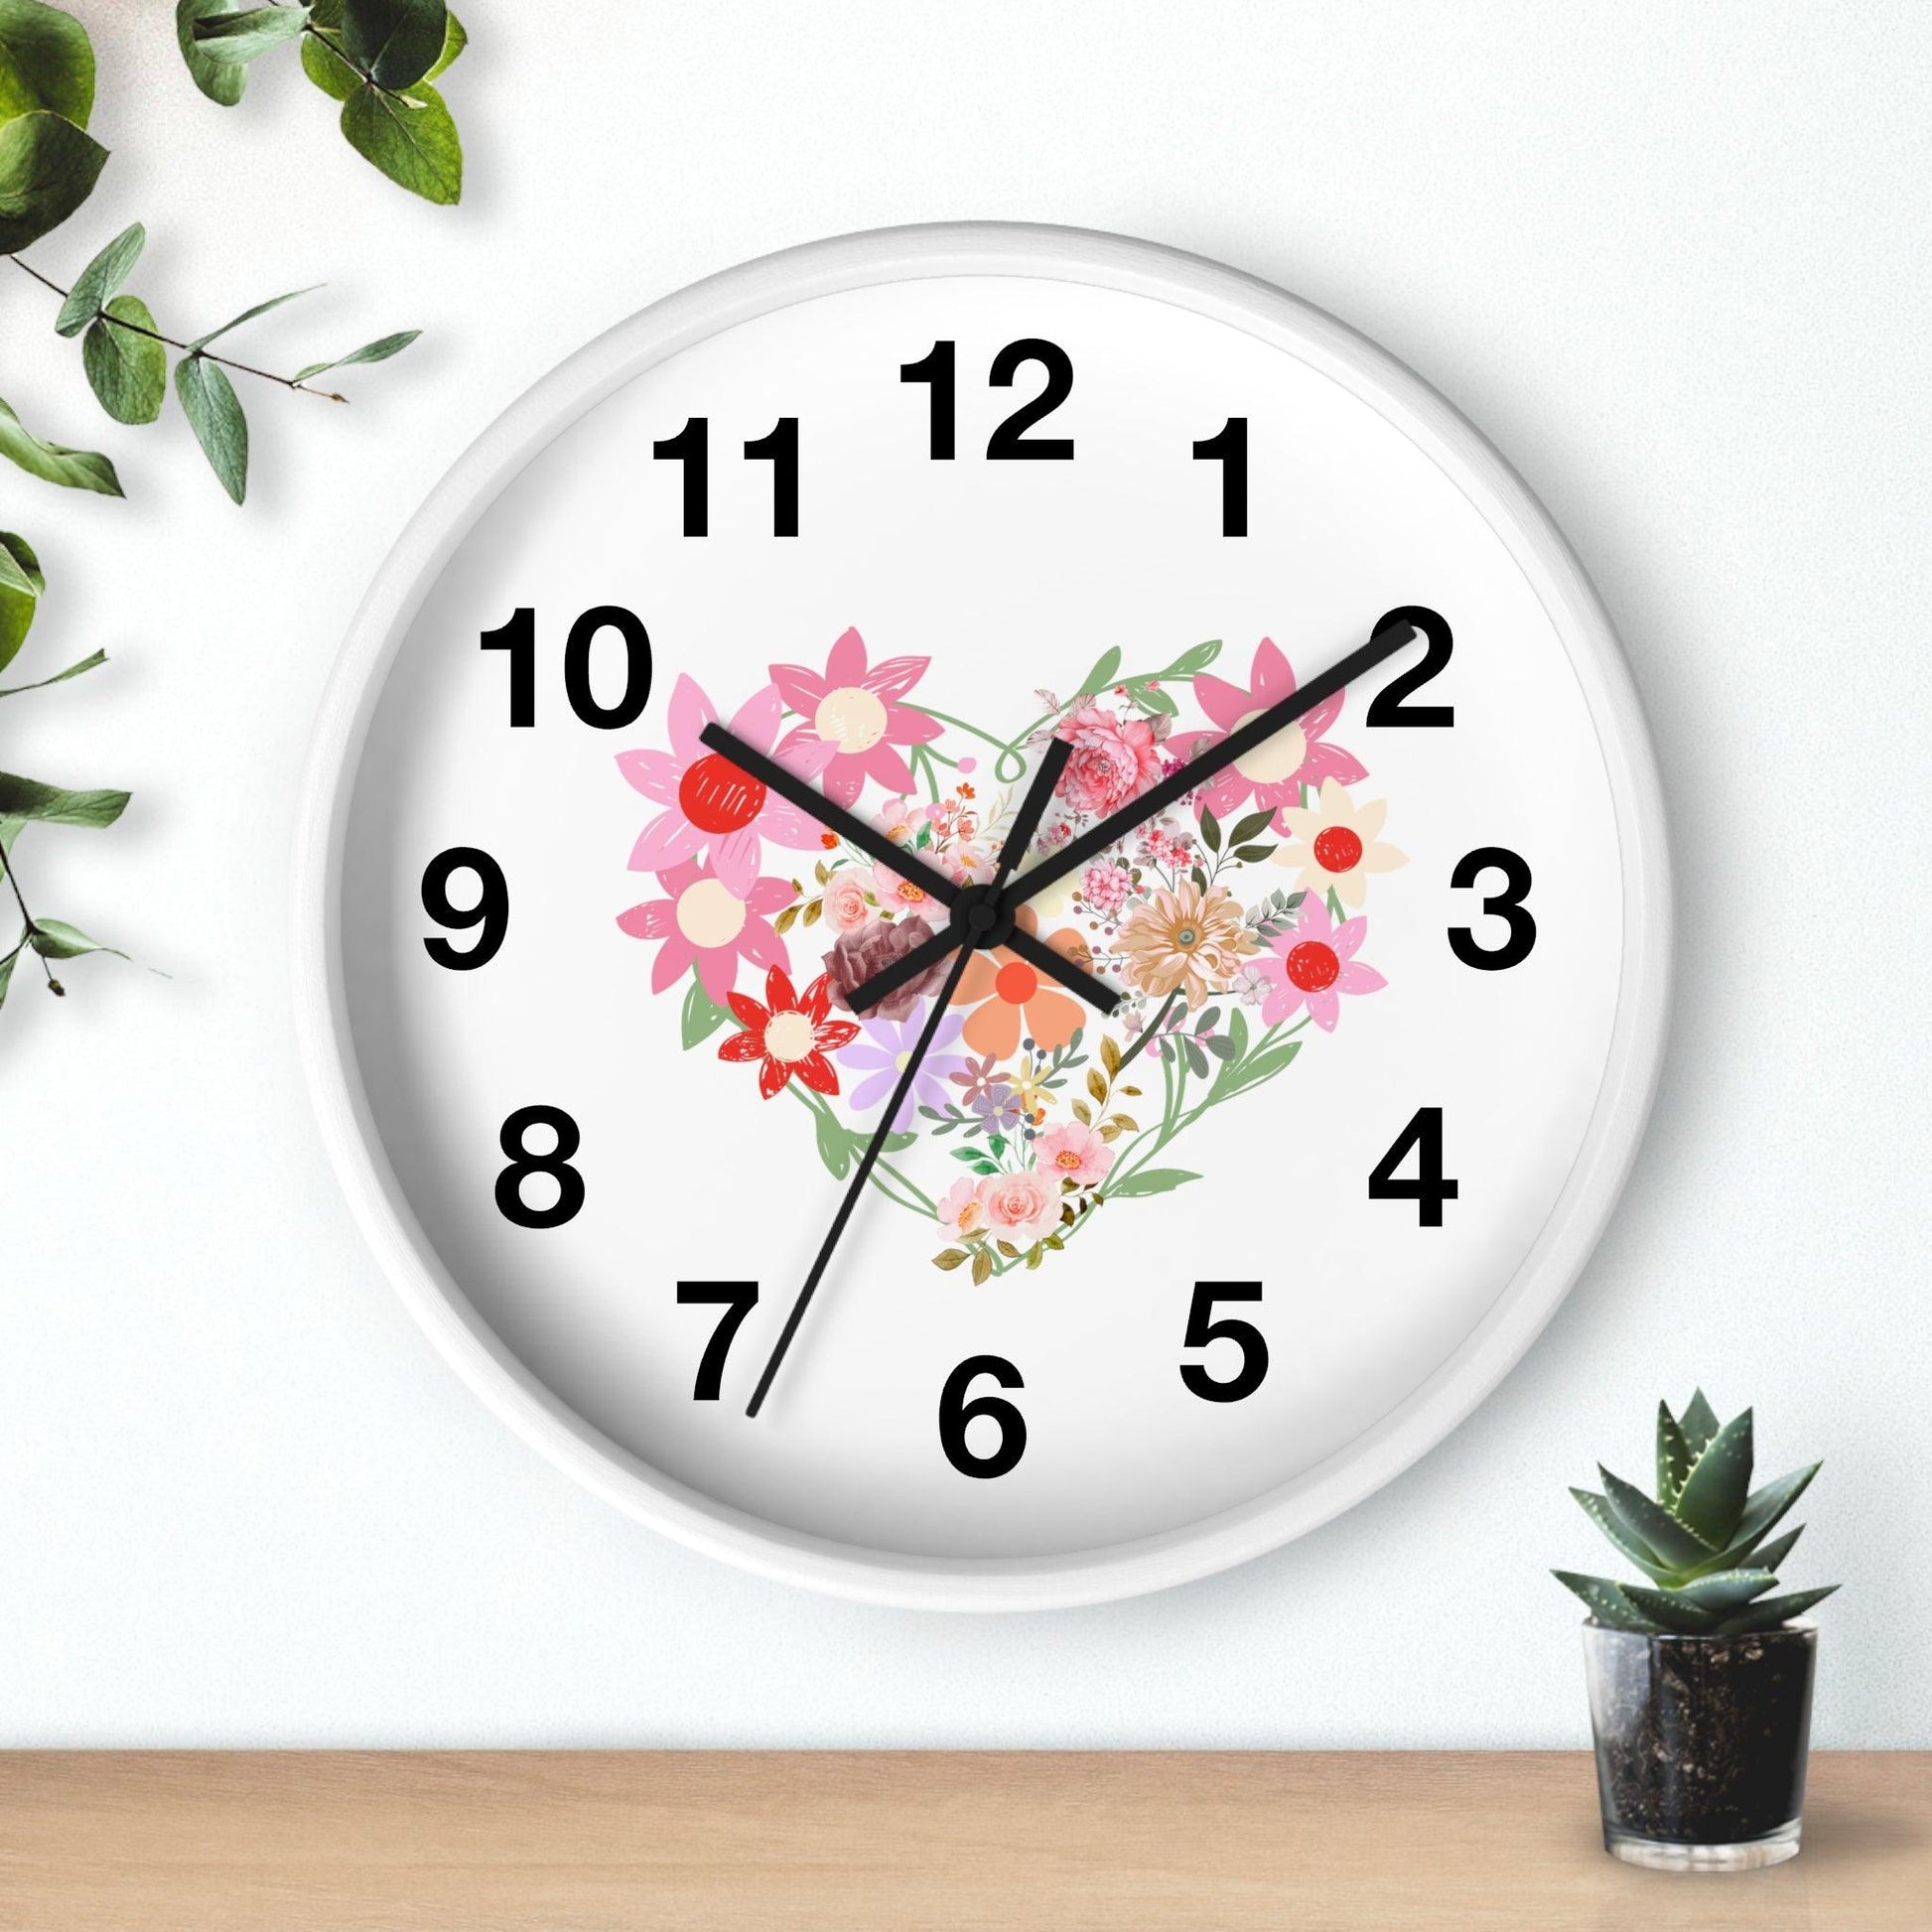 Flower wall clock, Flower Heart Wall clock, Floral Wall Clock, Home decor gift, House Warming gift, New Home Gift, Mom gift - Giftsmojo